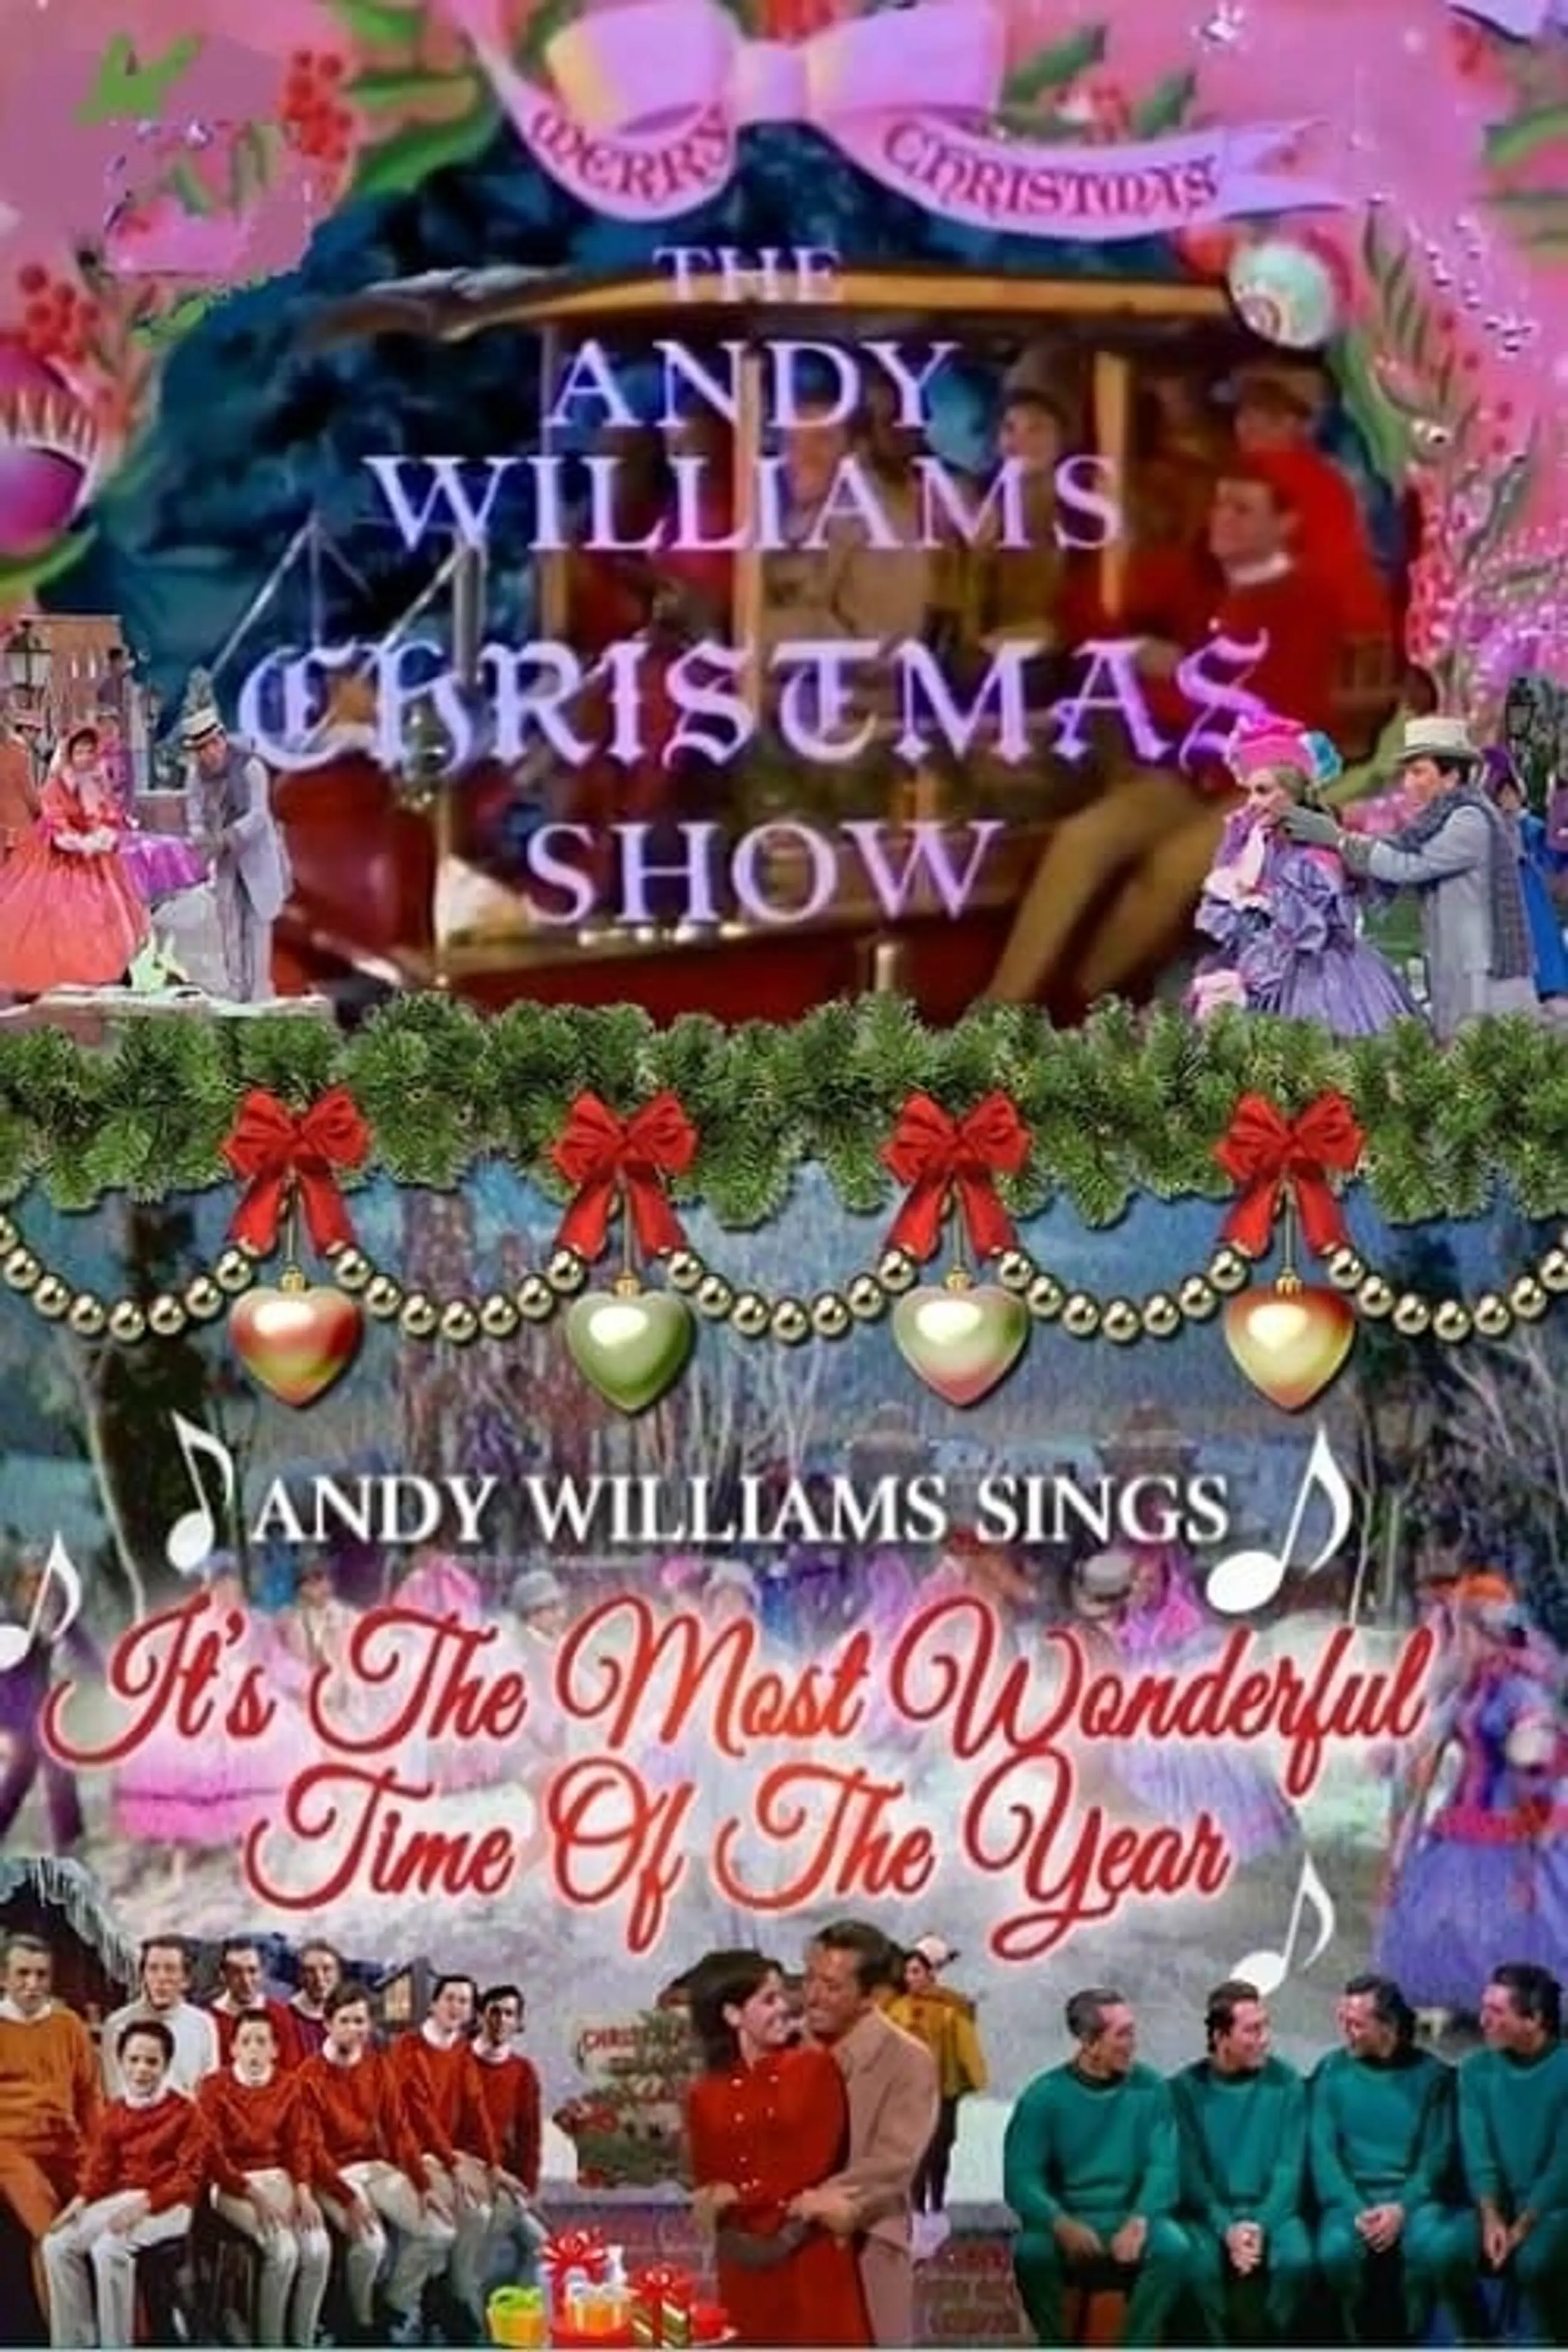 The Andy Williams Christmas Show